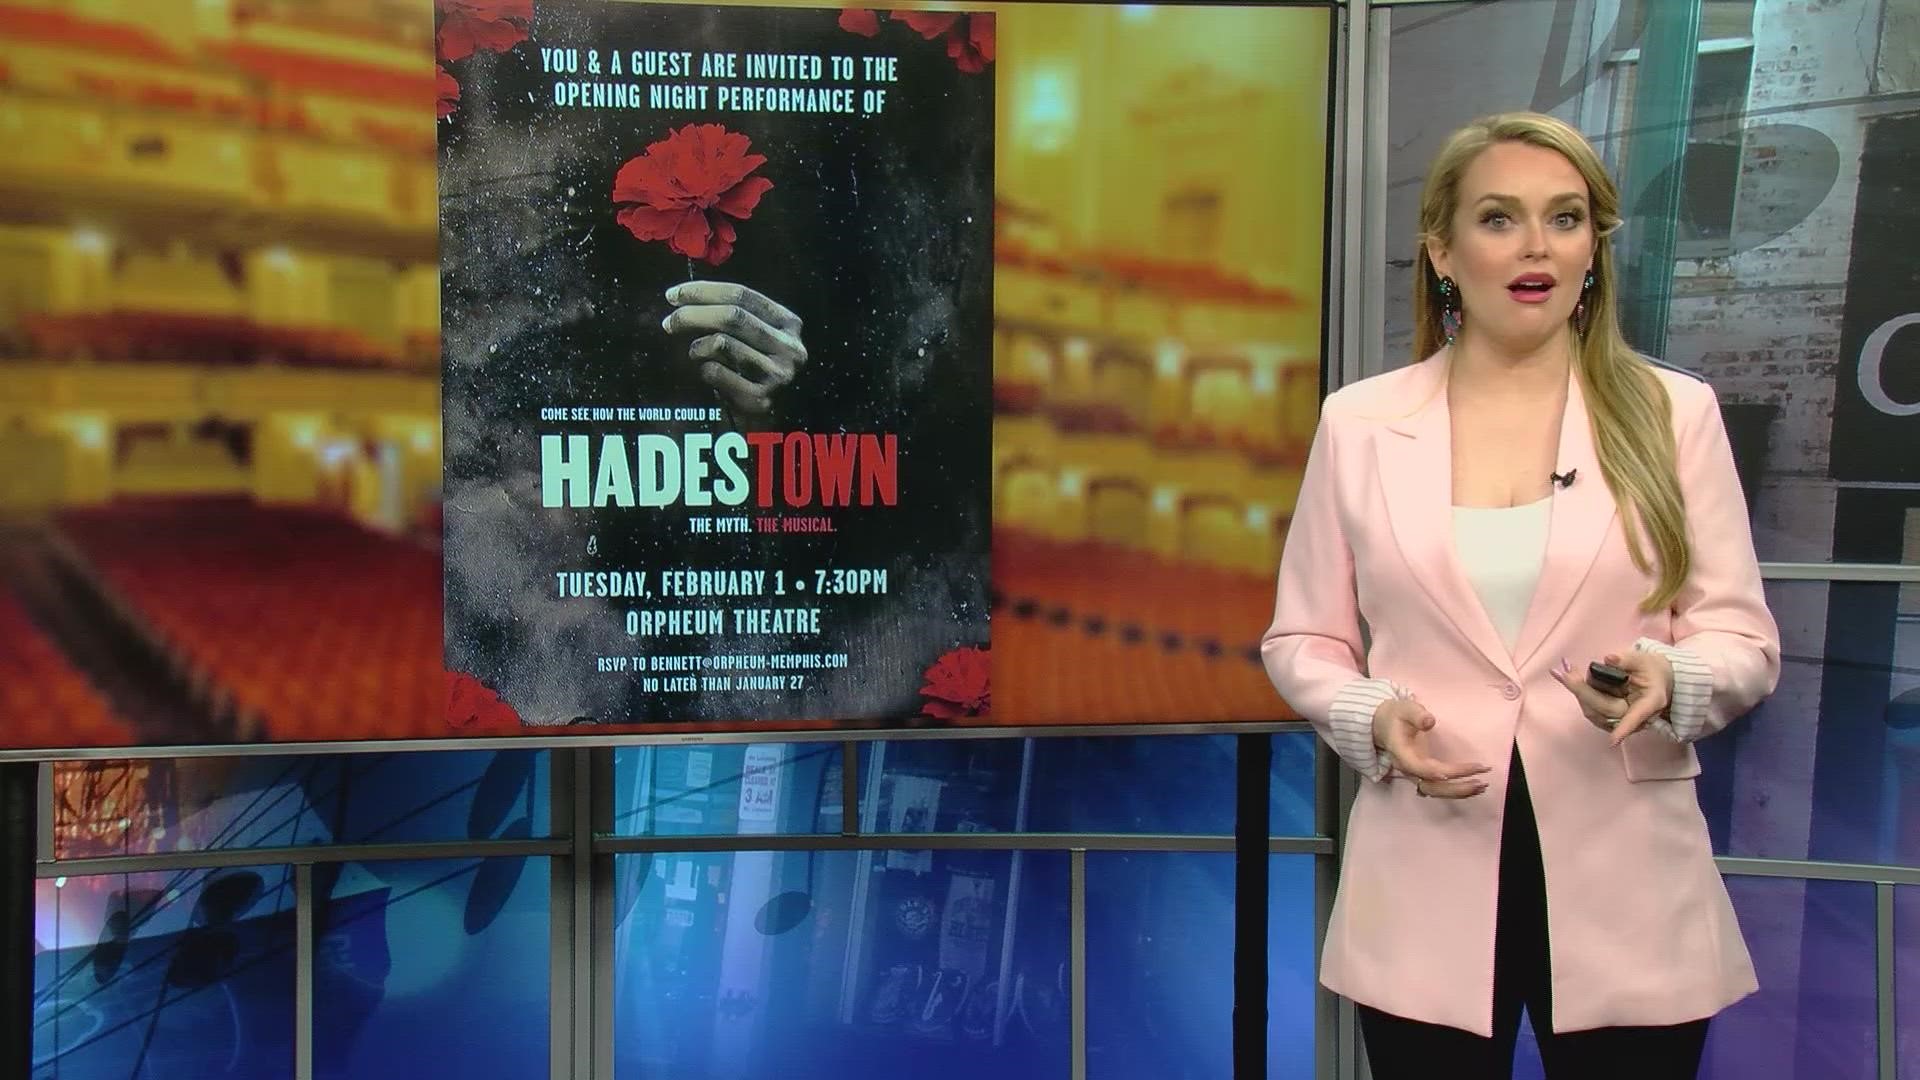 Hadestown on stage in Memphis from Feb. 1 - Feb. 6